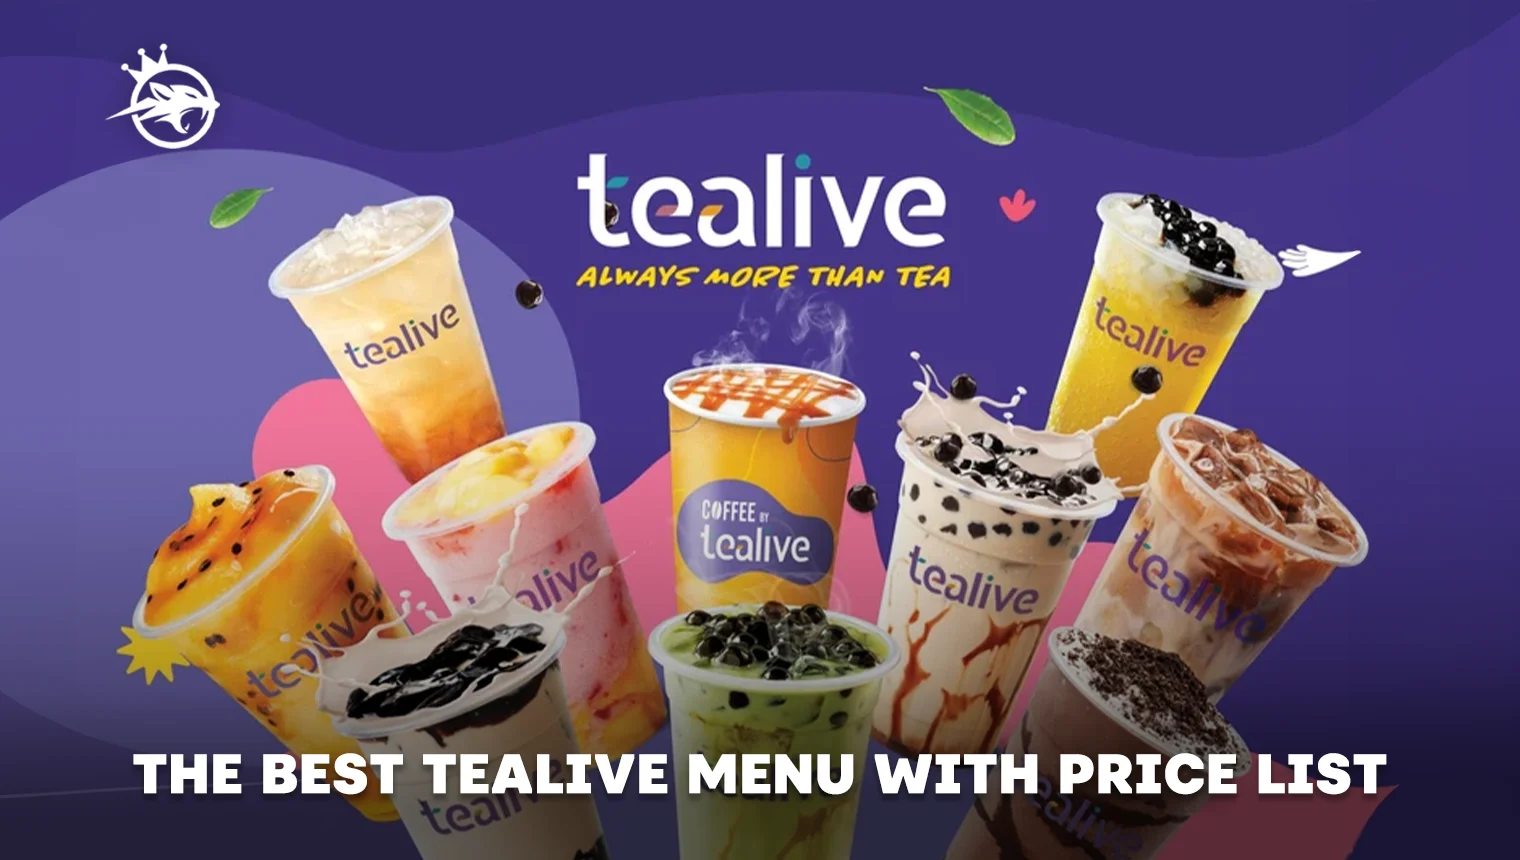 The Best Tealive Menu with Price List